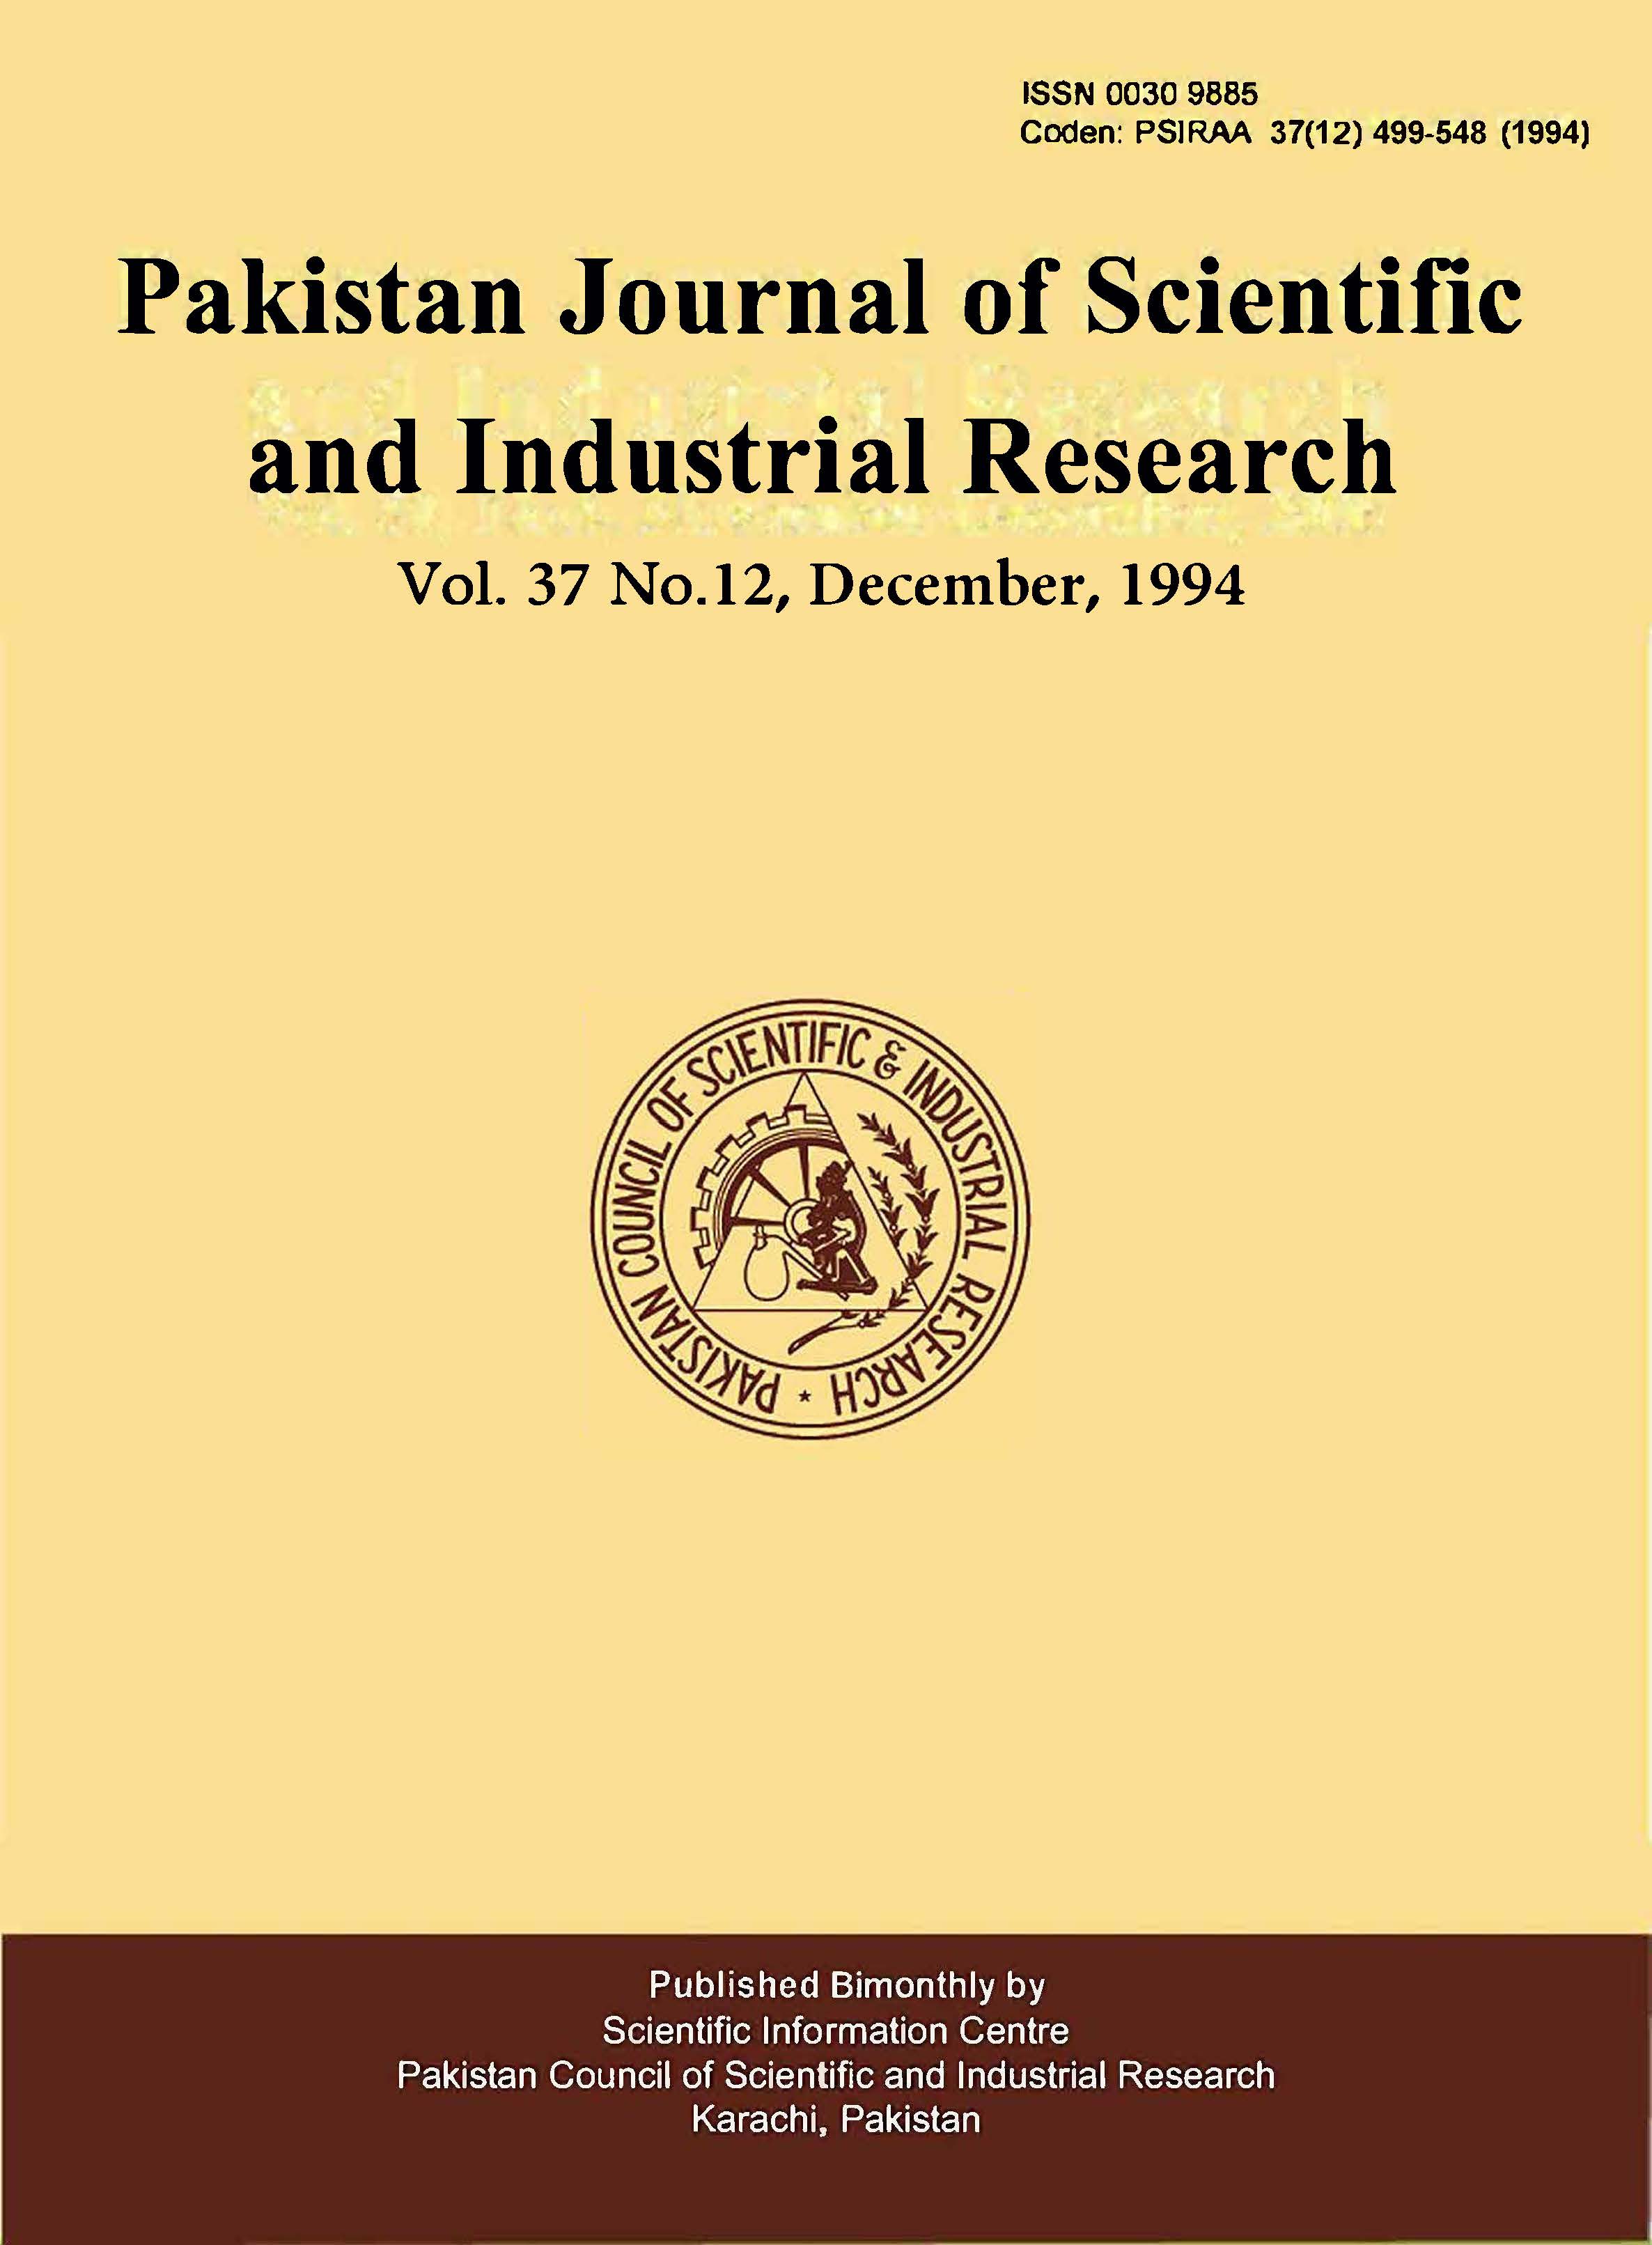 					View Vol. 37 No. 12 (1994): Pakistan Journal of Scientific and Industrial Research
				